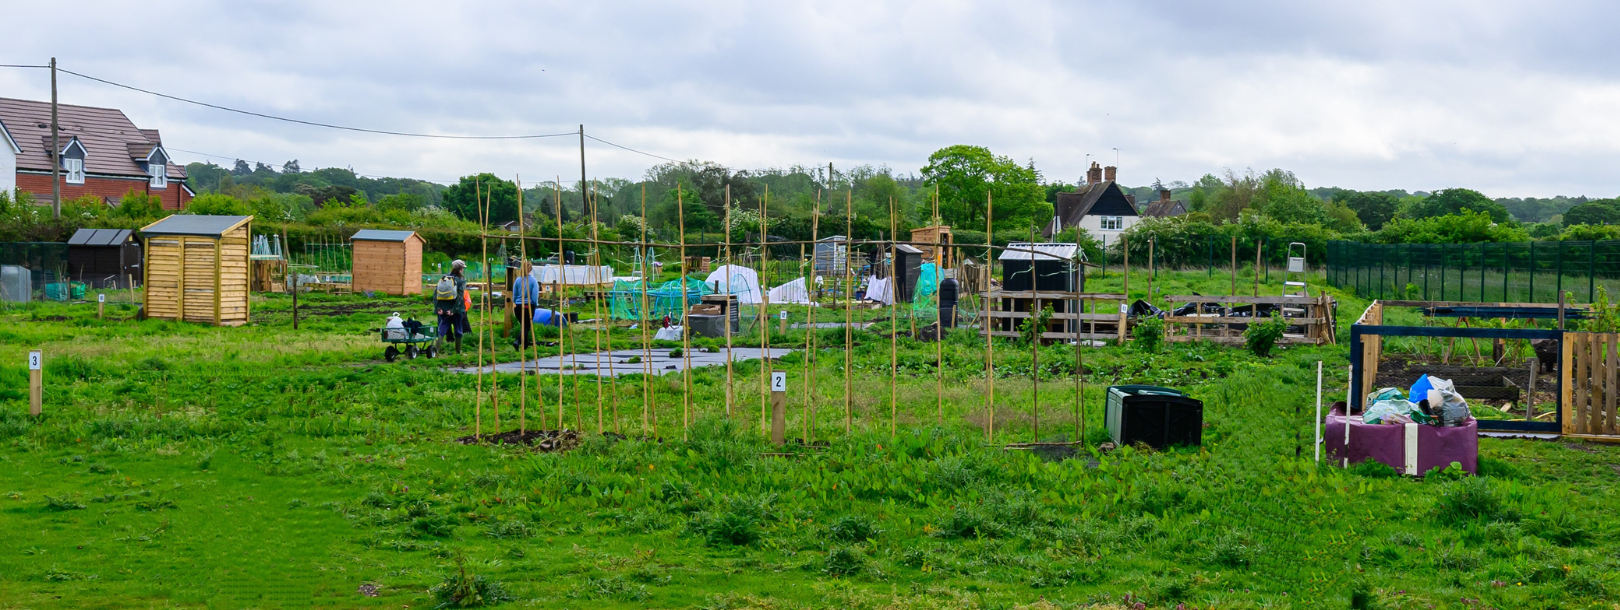 Opening of new allotment site at Crow Arch Lane